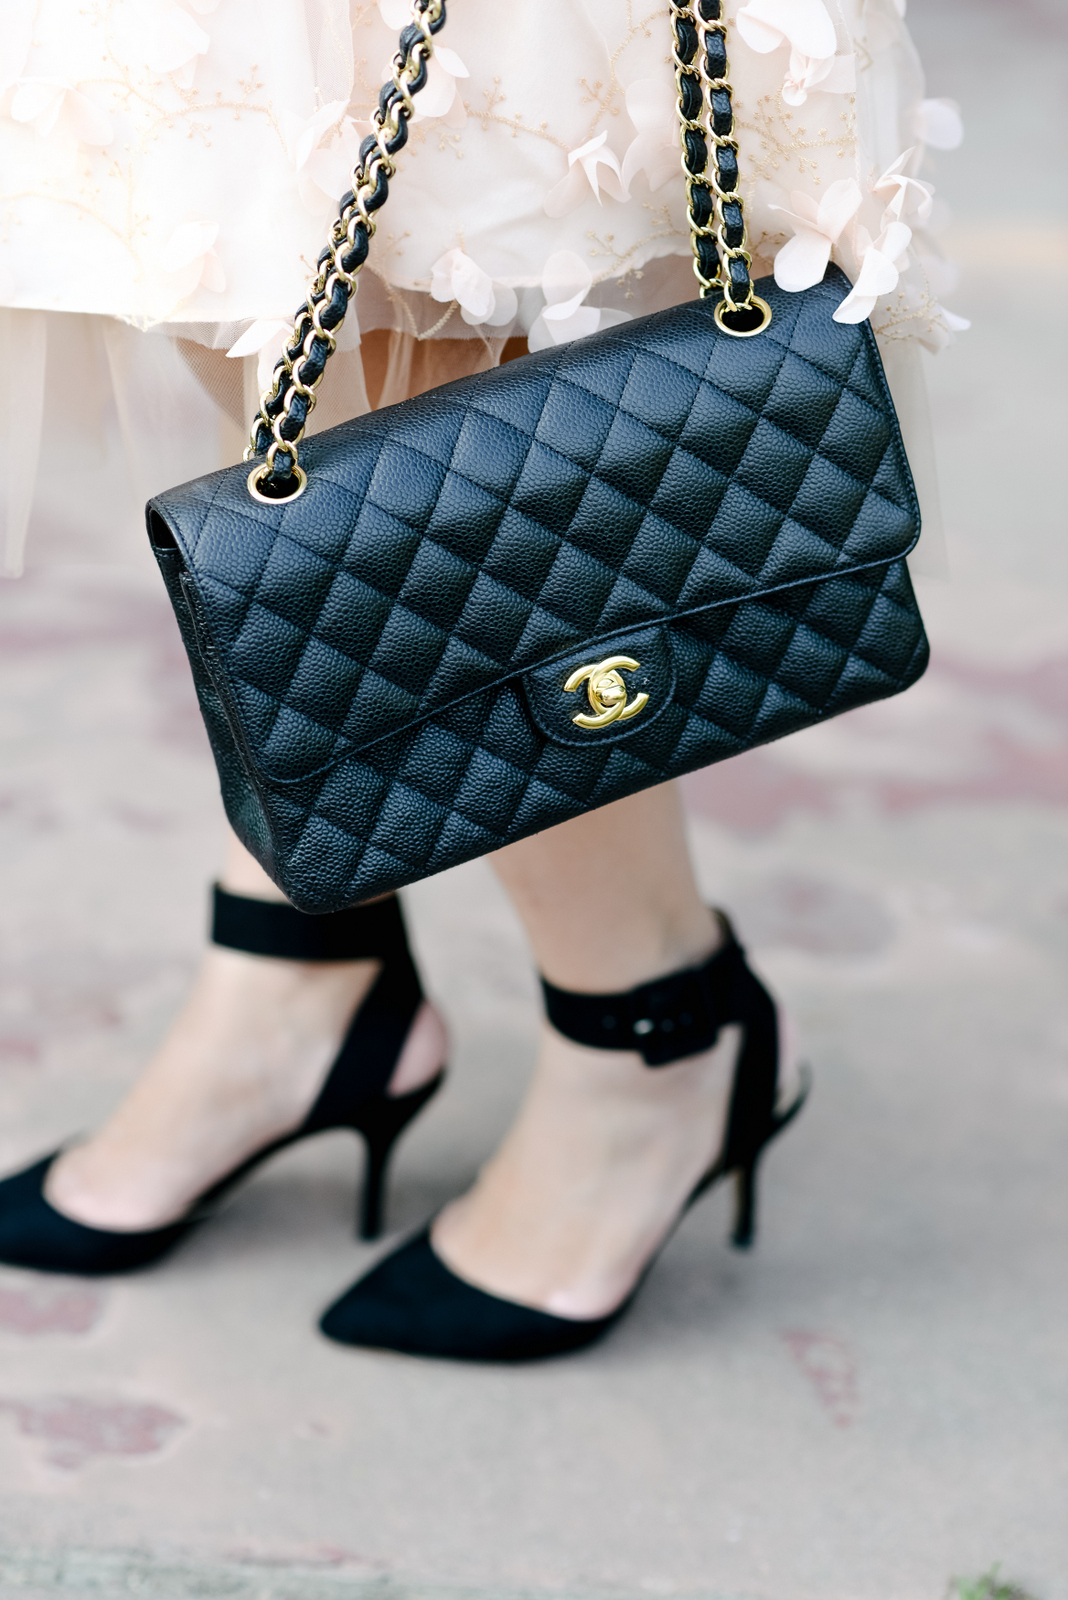 How to style a Chanel bag